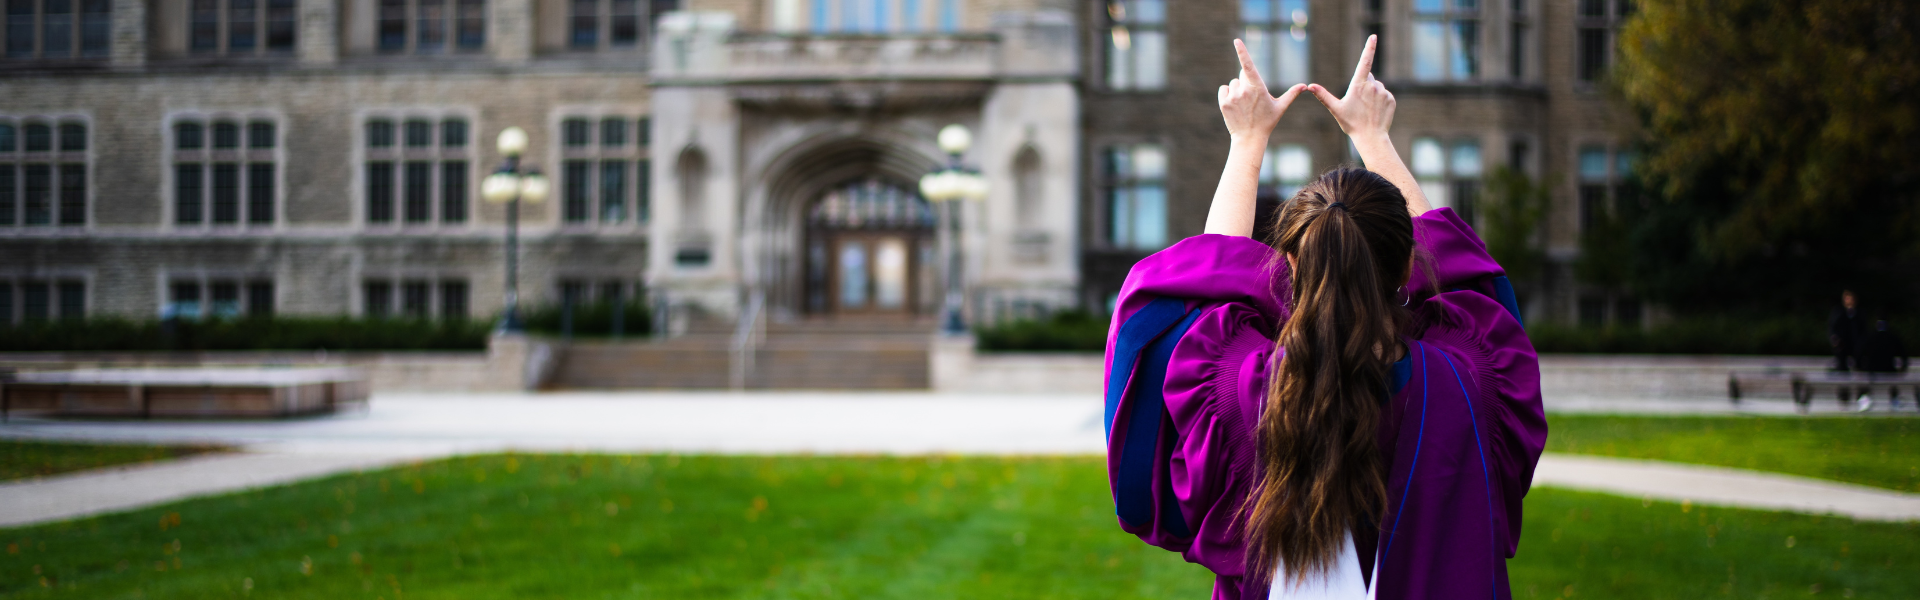 A graduate standing on campus in regalia creating a "W" with their hands